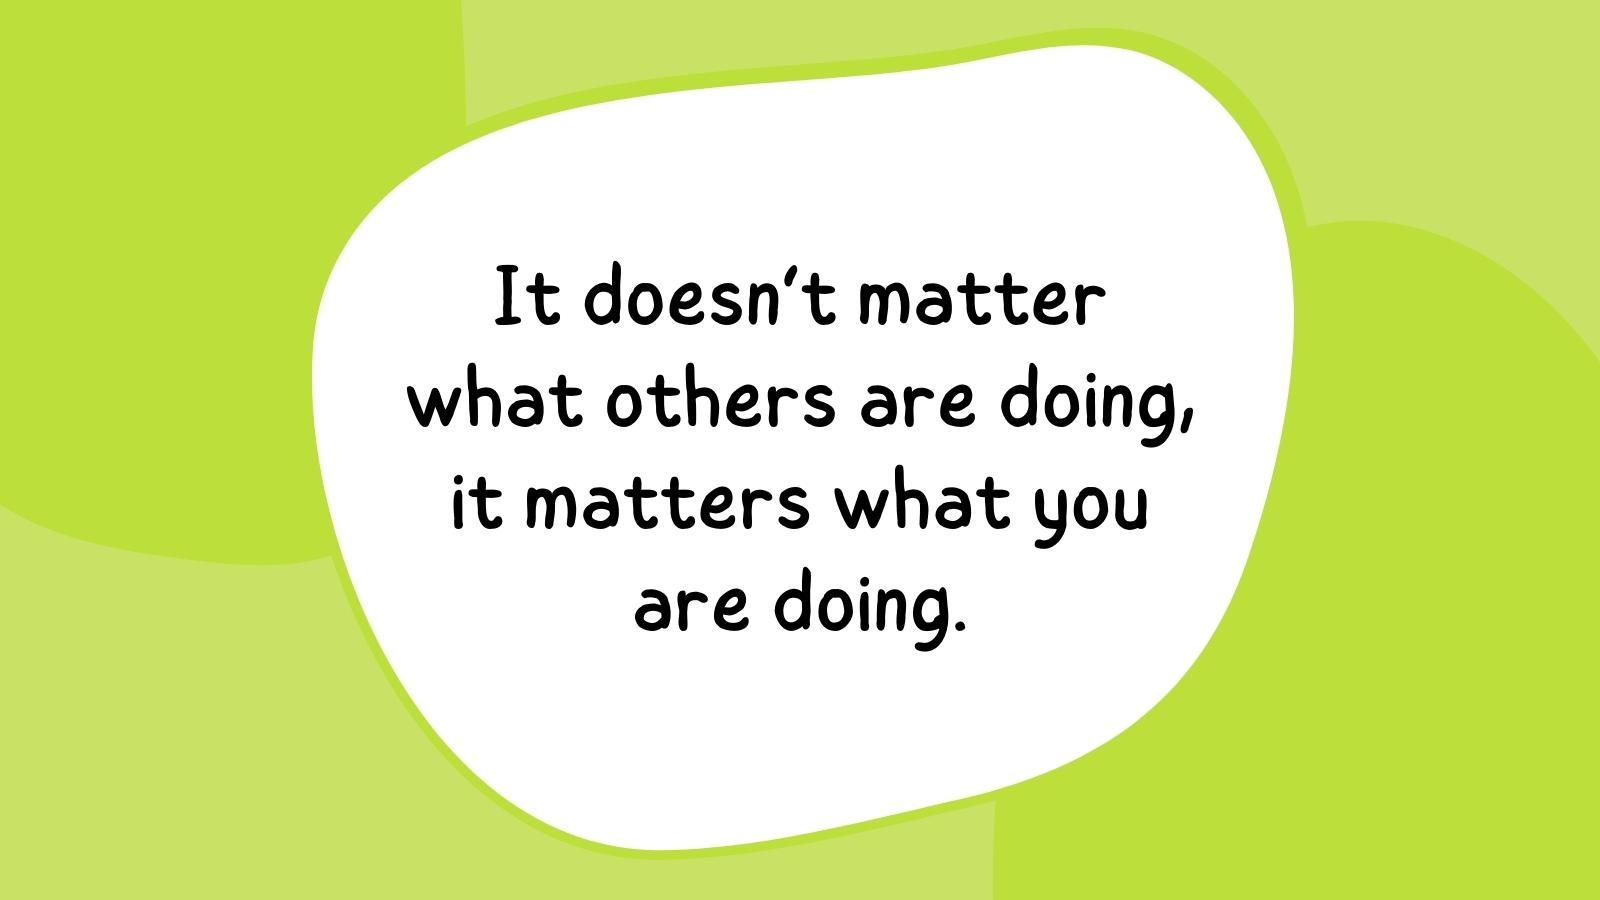 It doesn’t matter what others are doing, it matters what you are doing.